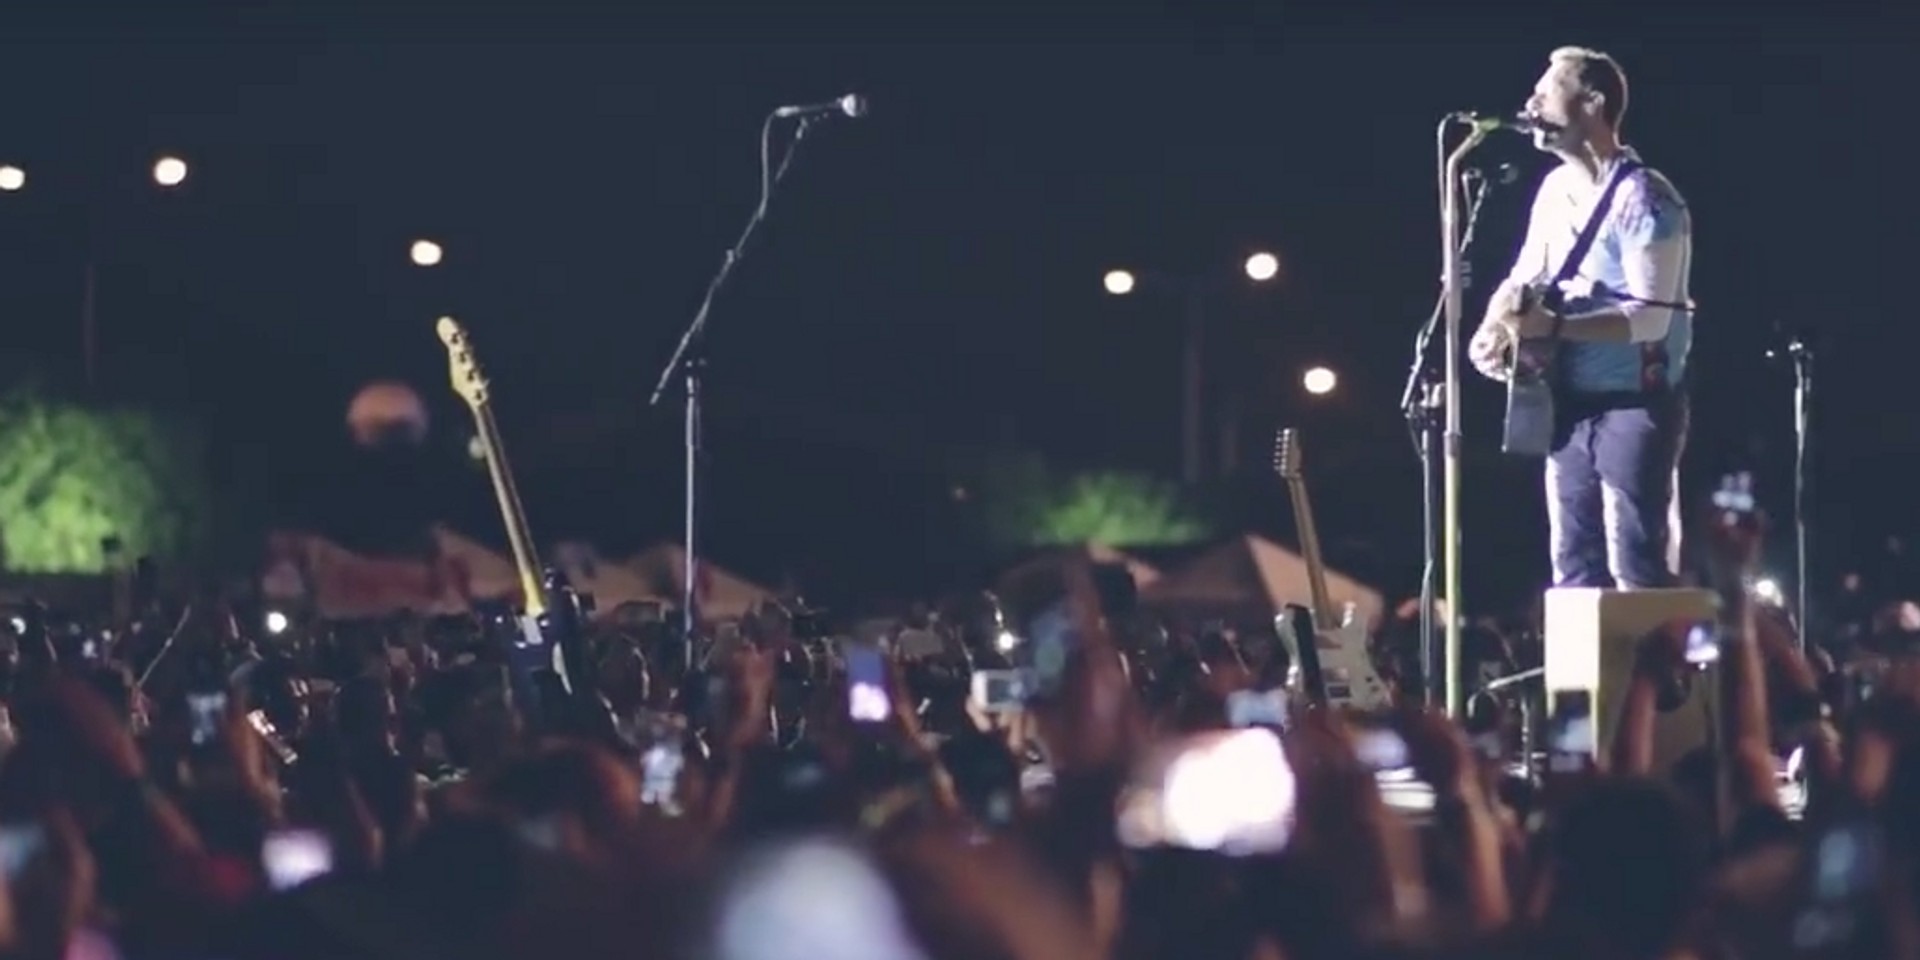 Relive Coldplay Live in Manila through Globe's official aftermovie